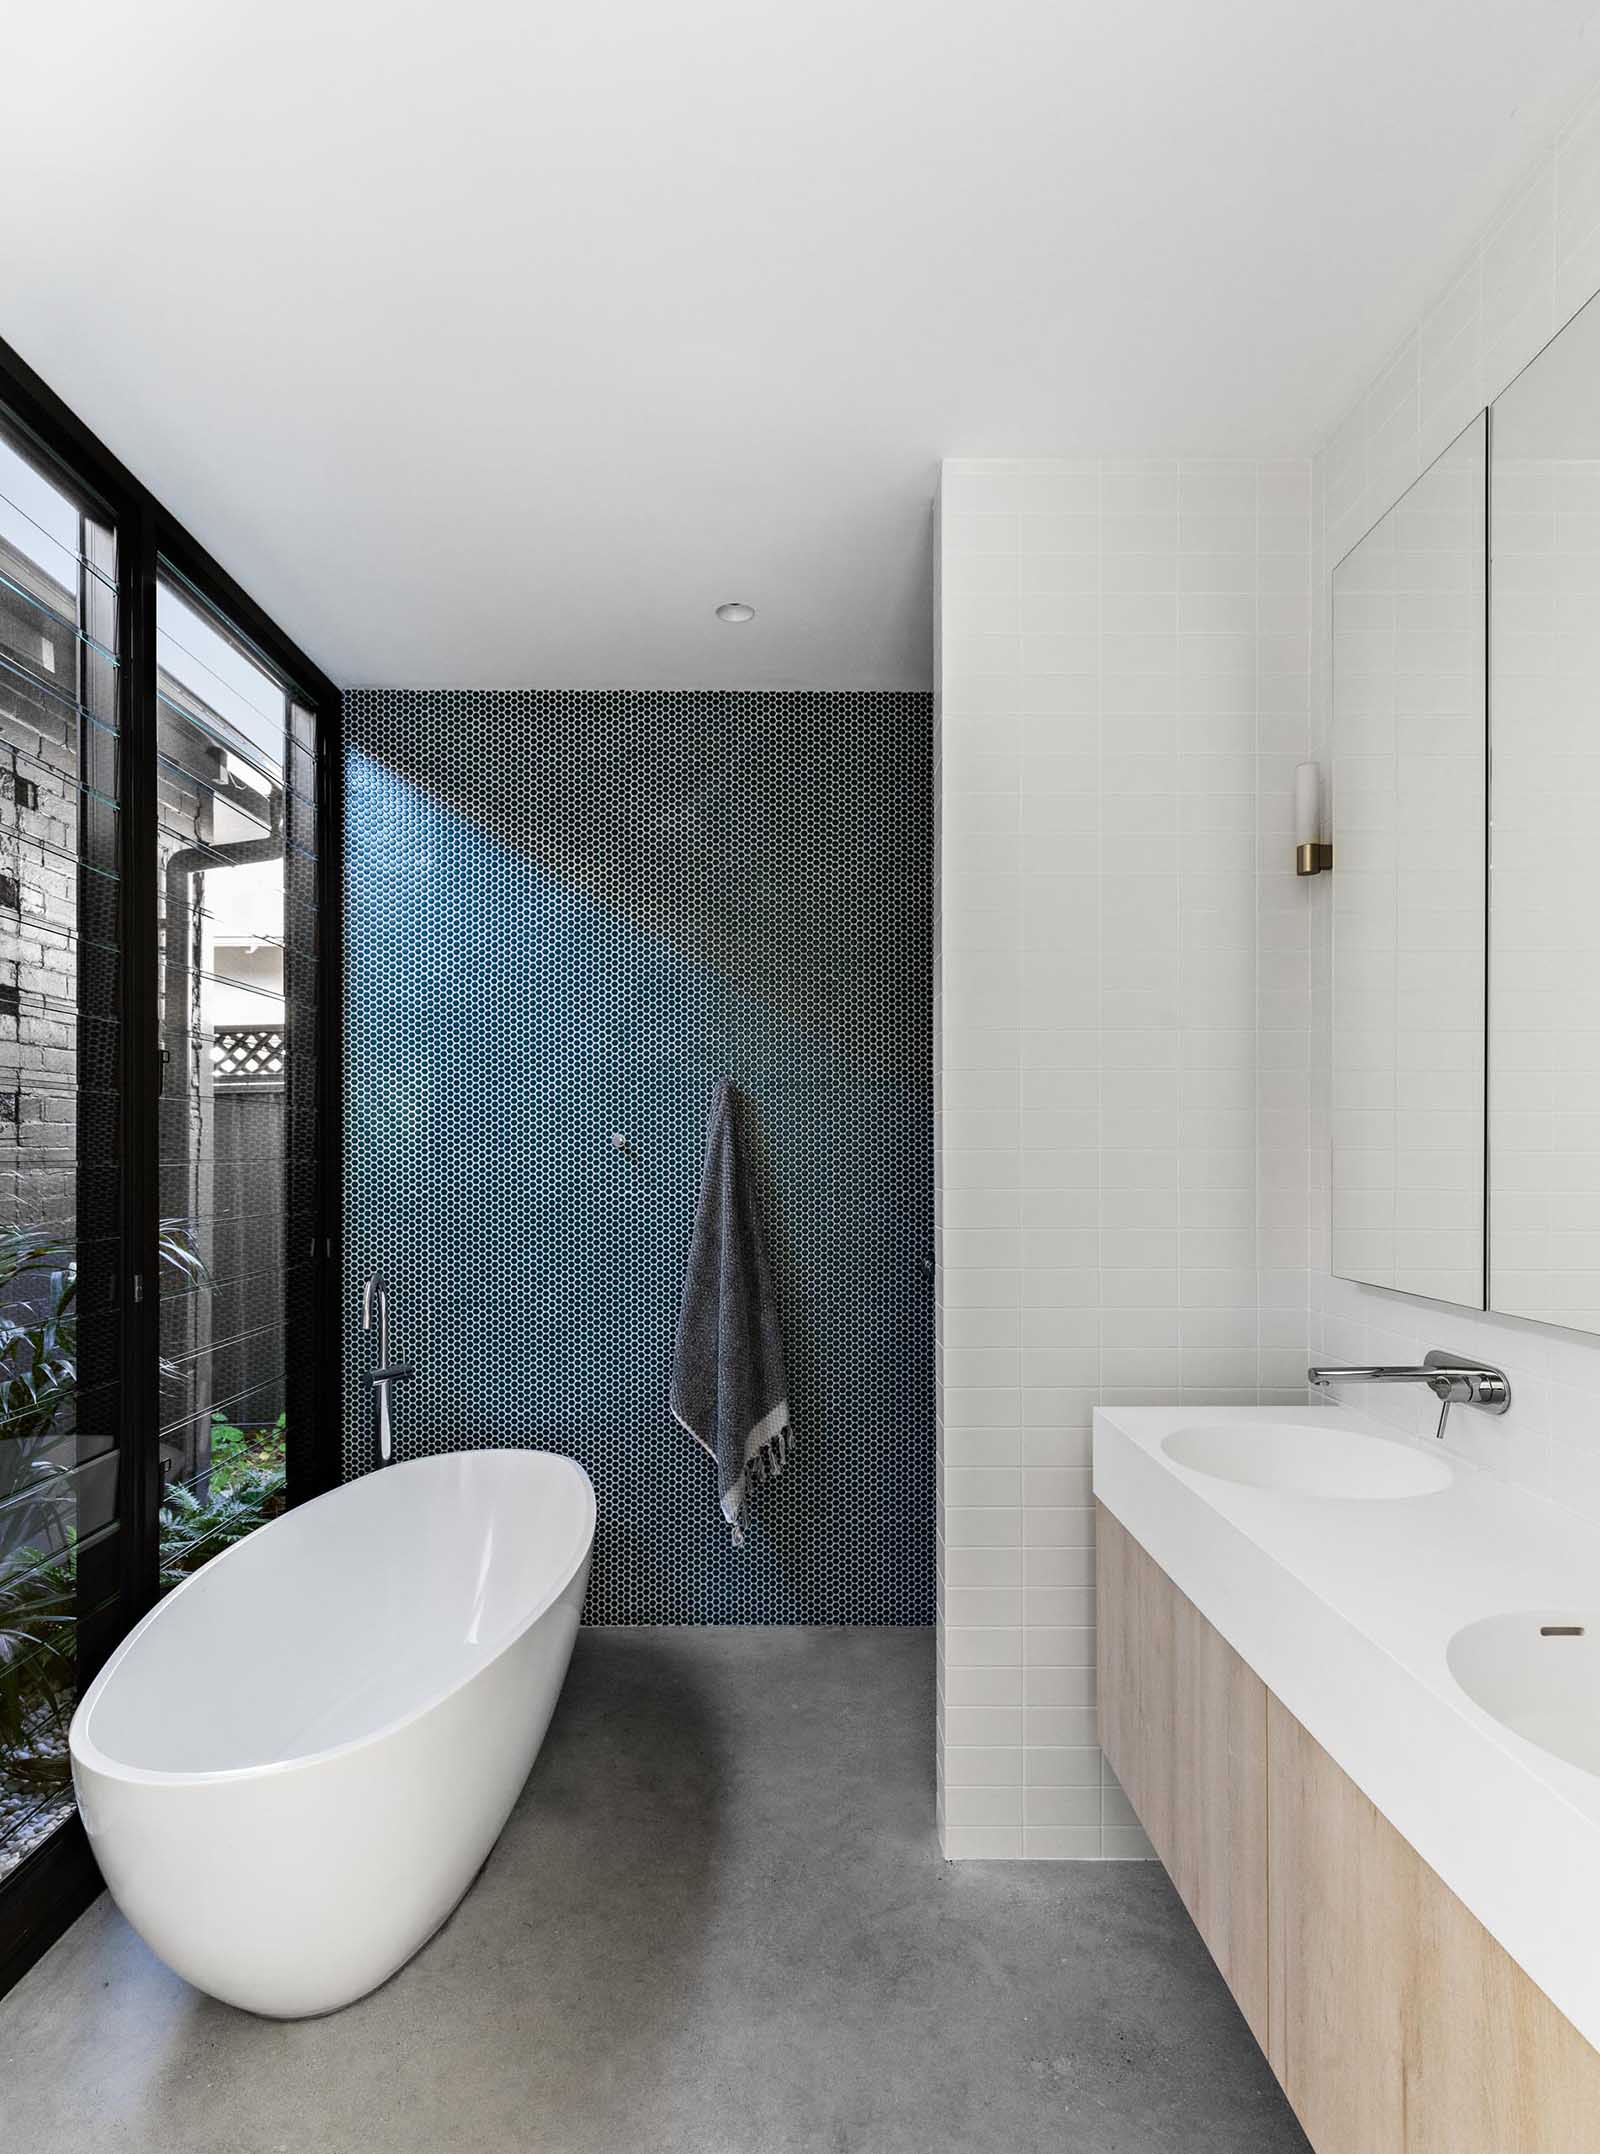 A modern bathroom with a green penny tile accent wall, freestanding bathtub, louvre windows, and concrete flooring.